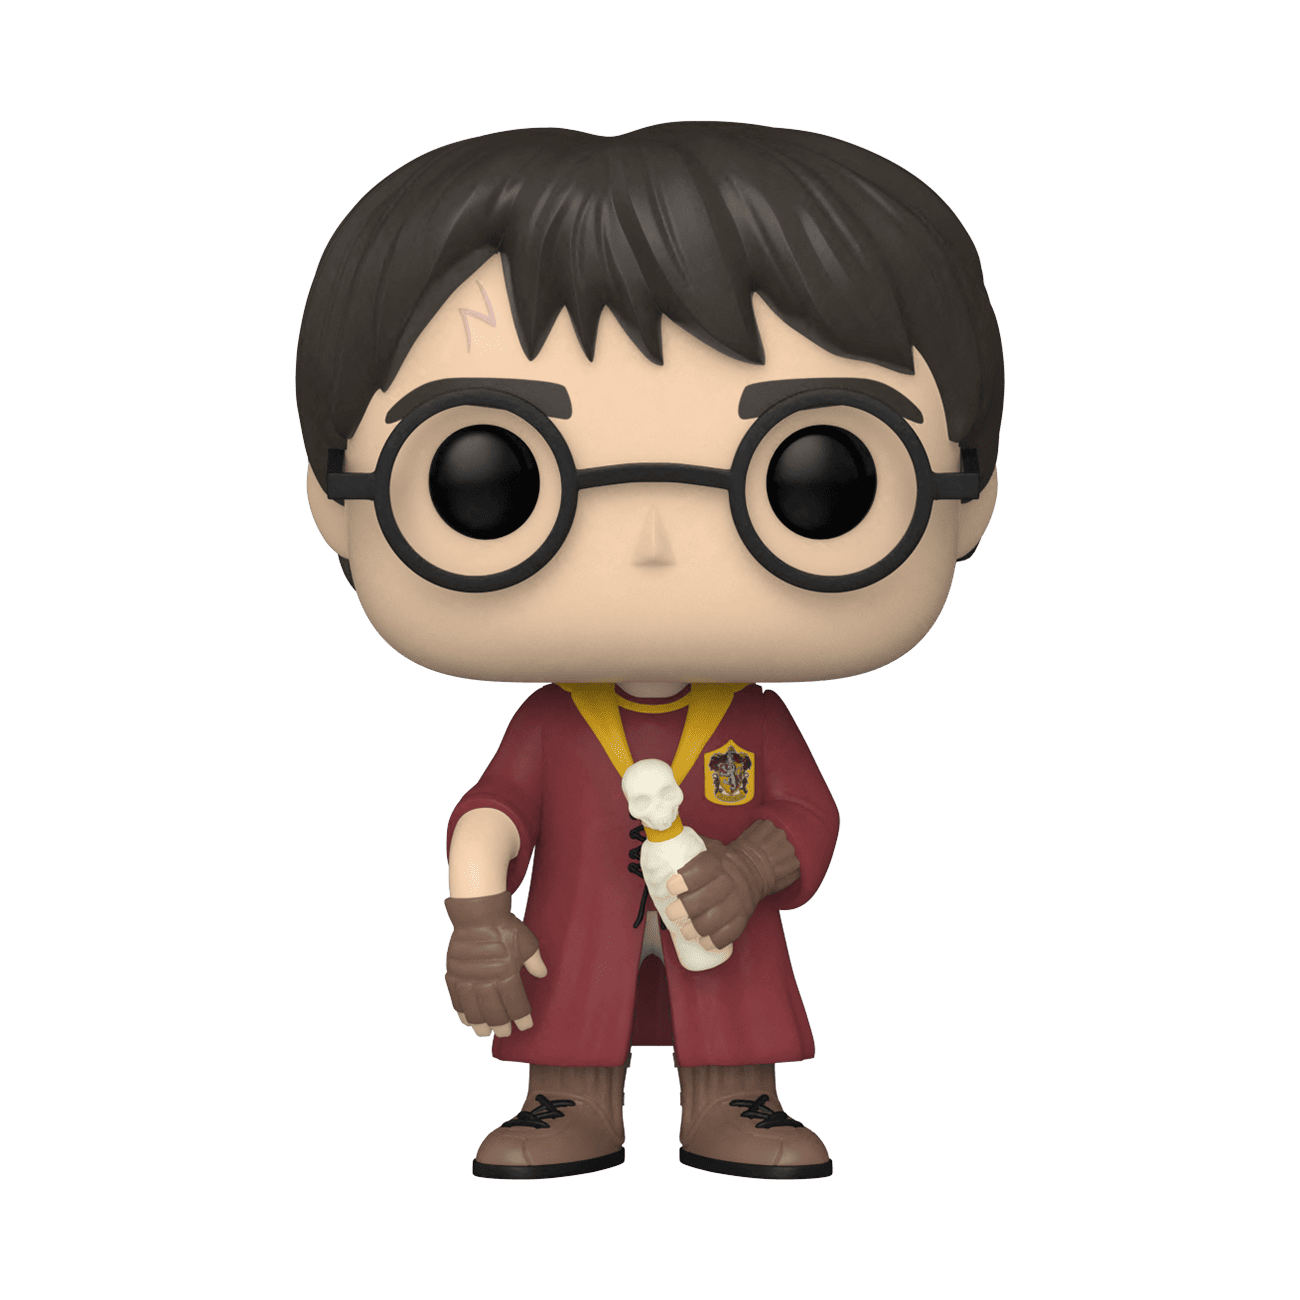 Pop! Harry Potter with Potion at Funko.